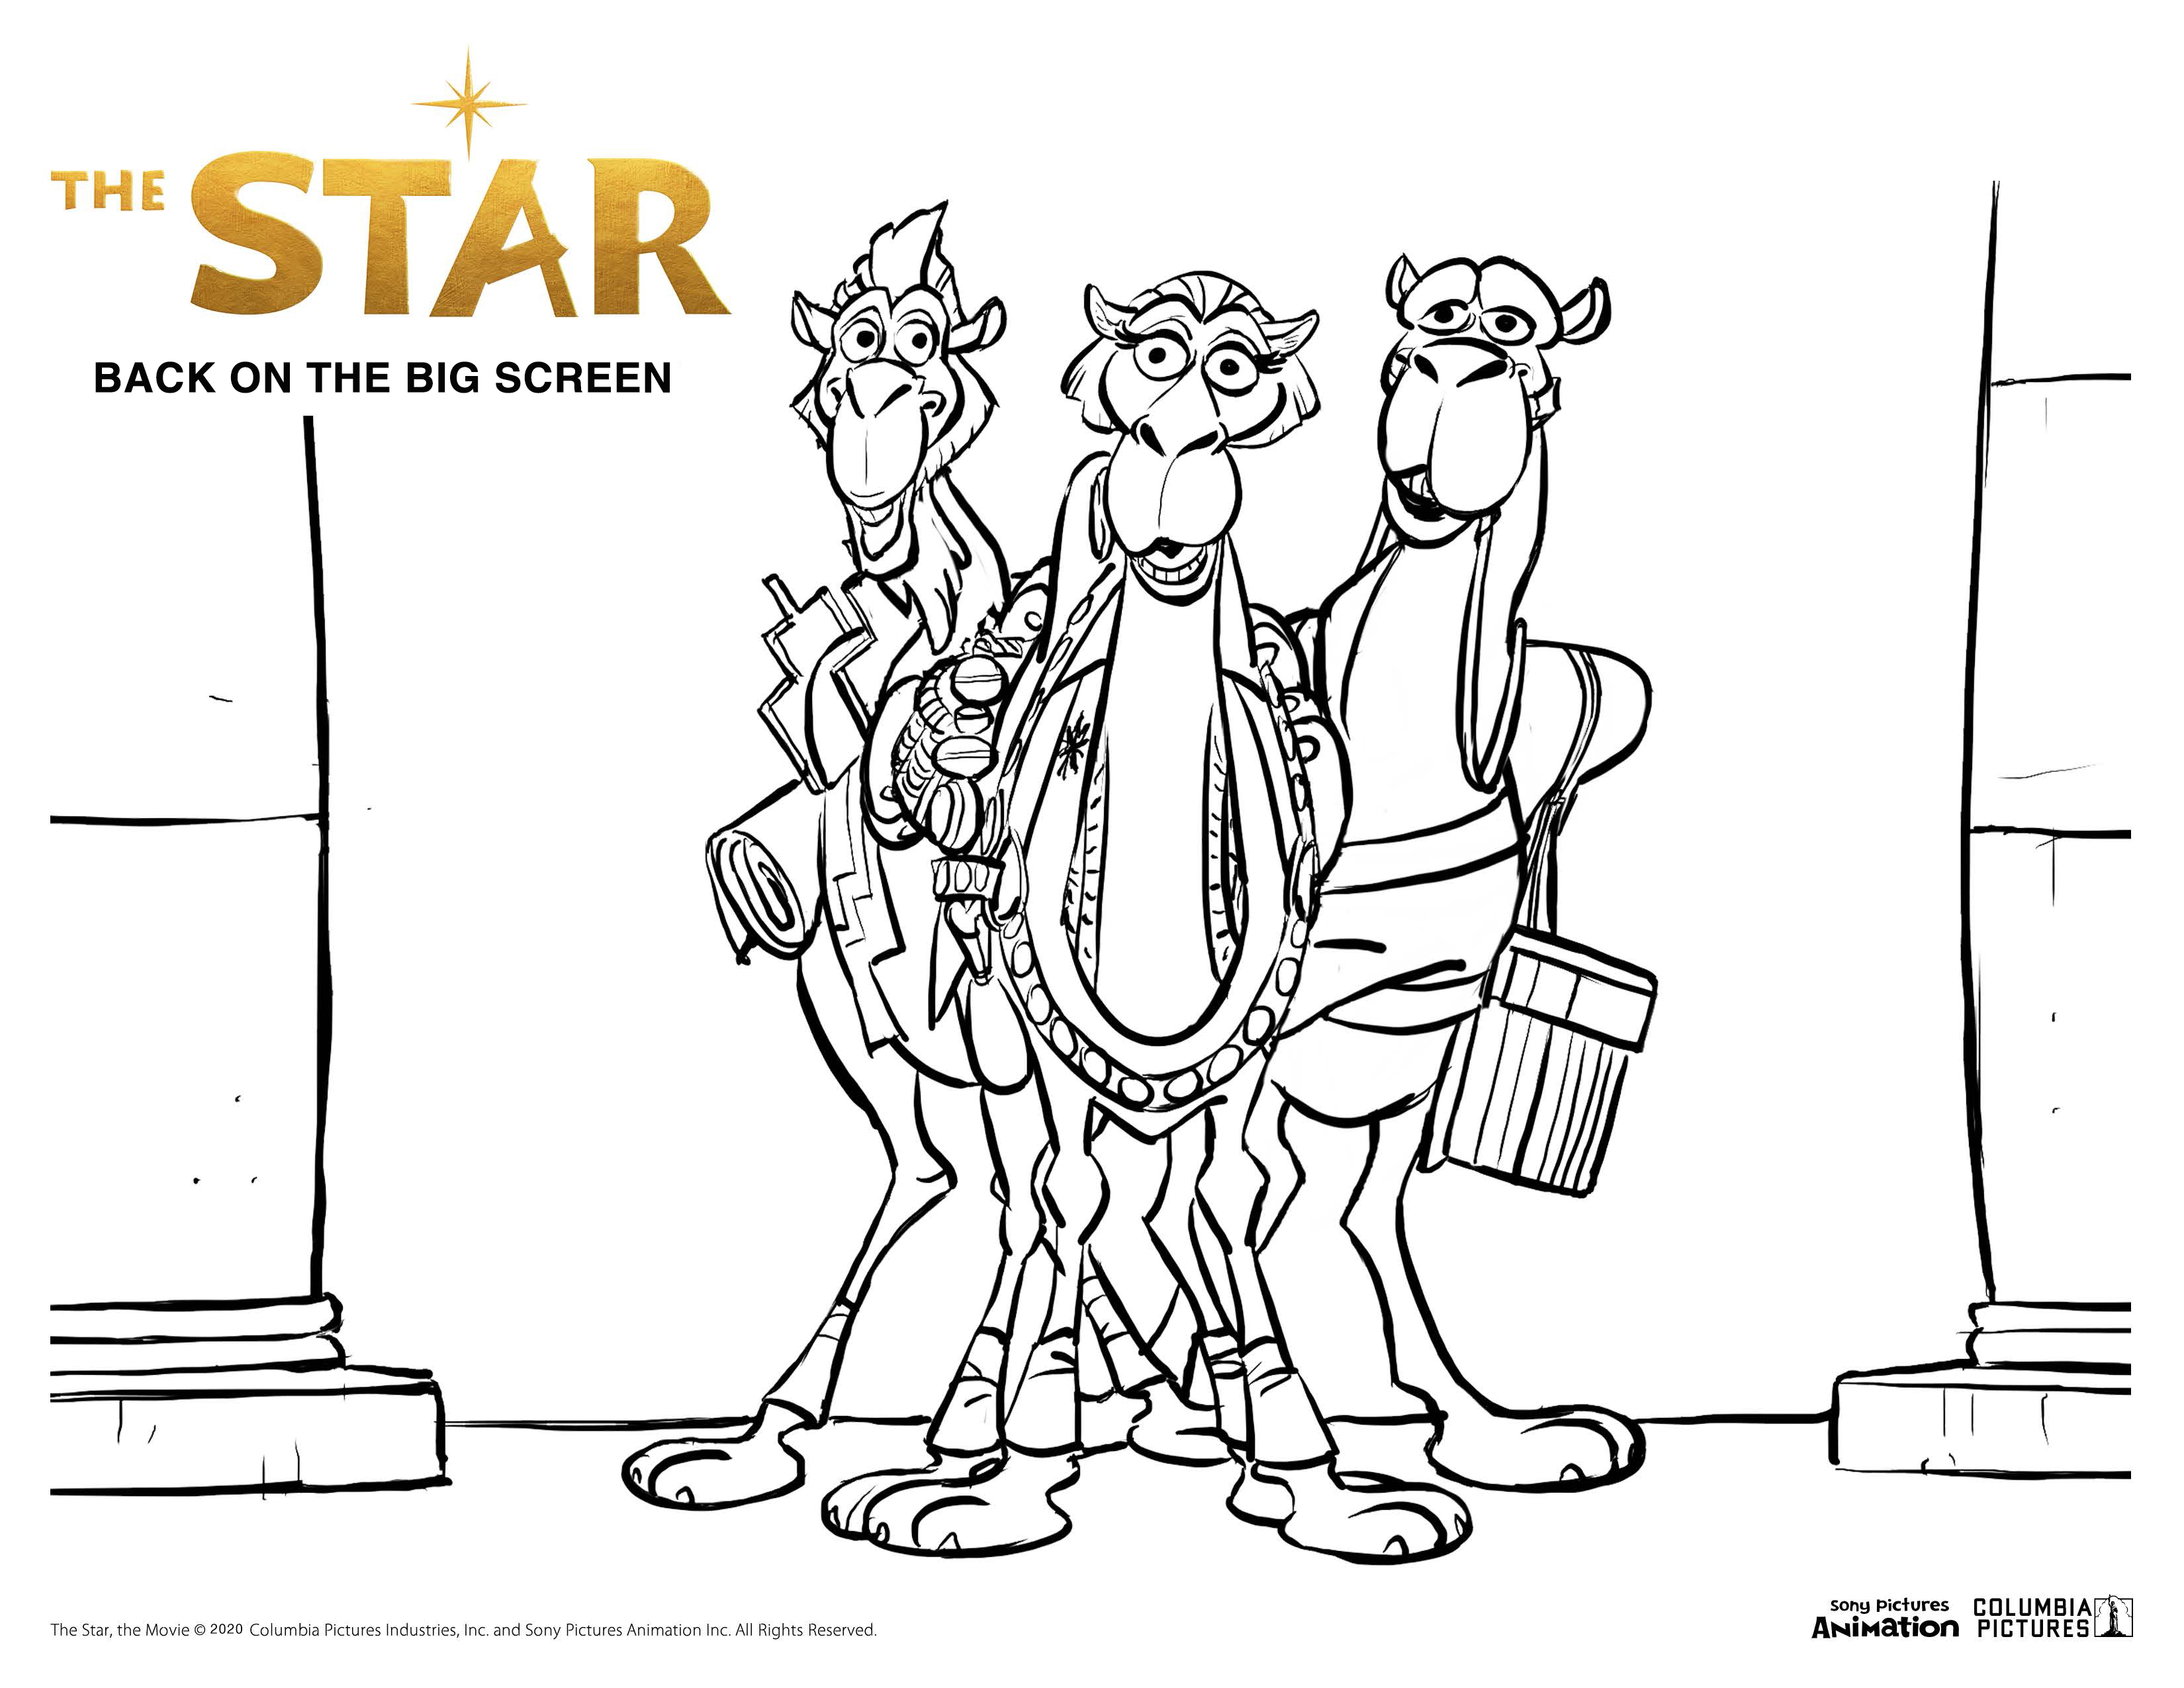 Allen theatres on x get in the christmas spirit with these thestarmovie coloring pages â allentheatres sony pictures animation httpstcoumqmhnxwtv x